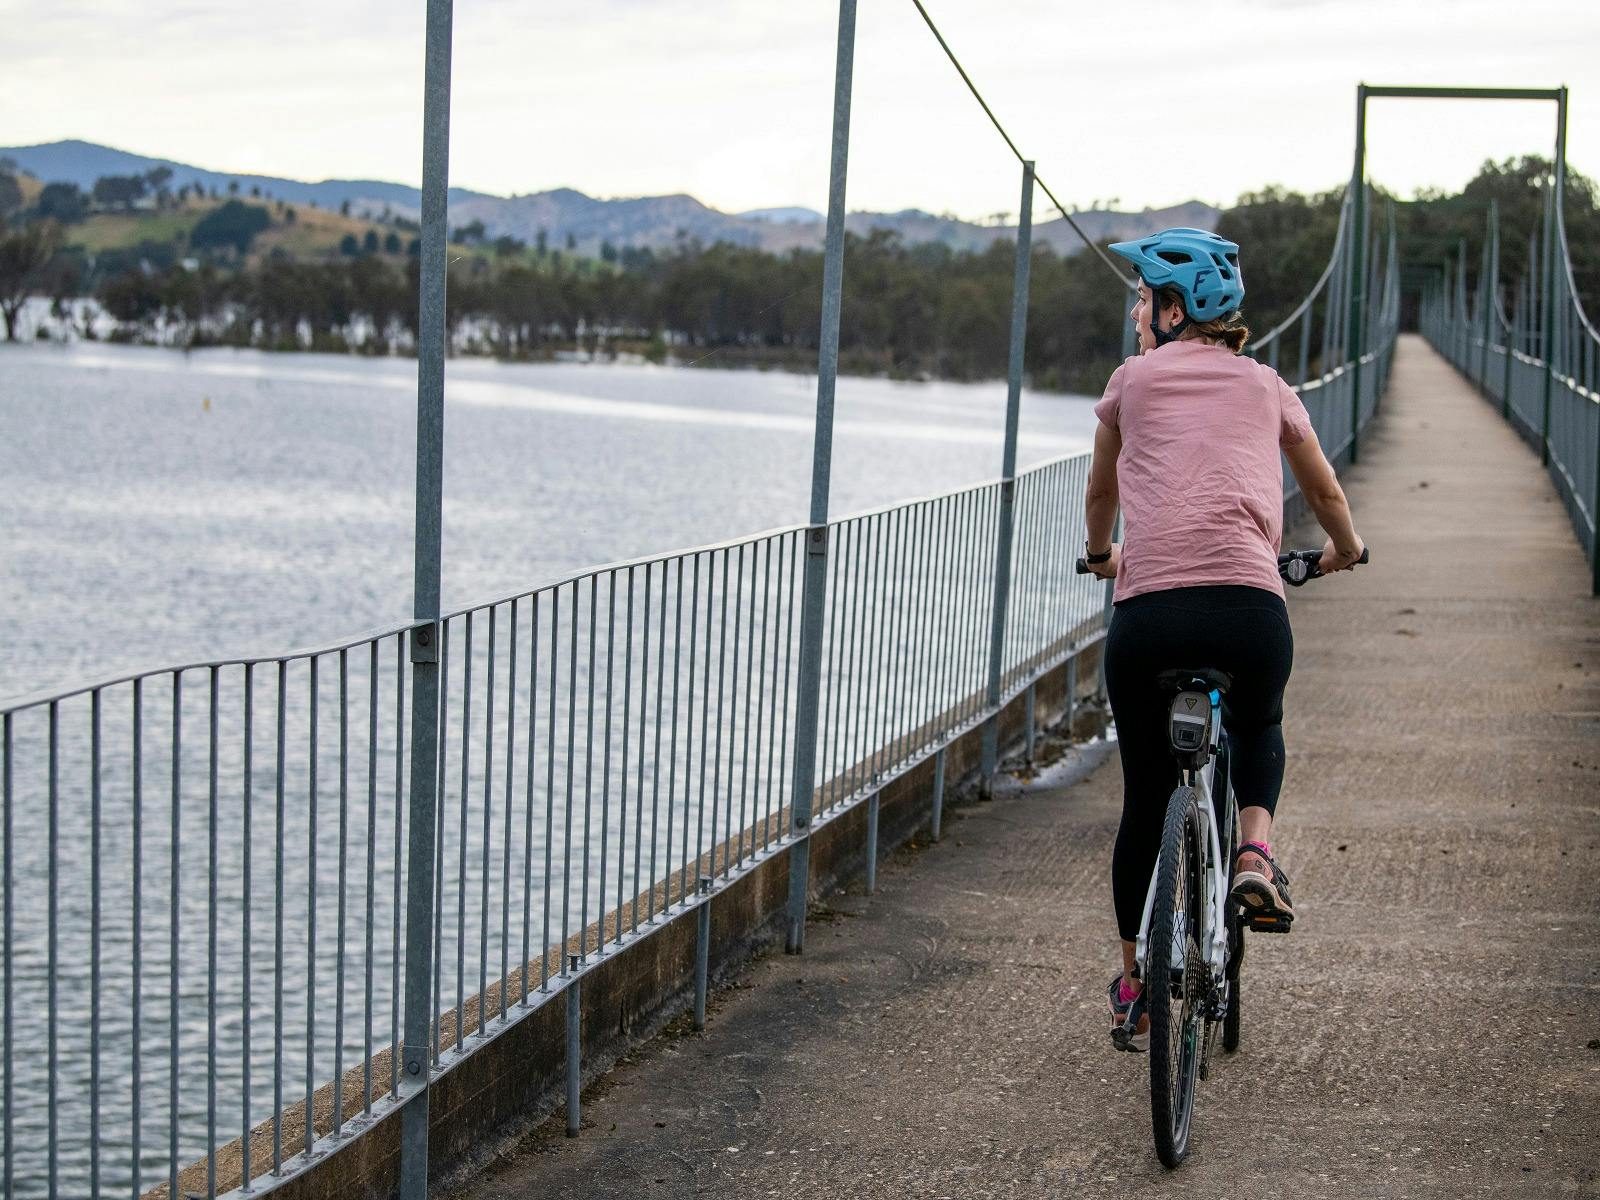 Riding bicycle across Bonnie Doon Bridge on the Great Victorian Rail Trail